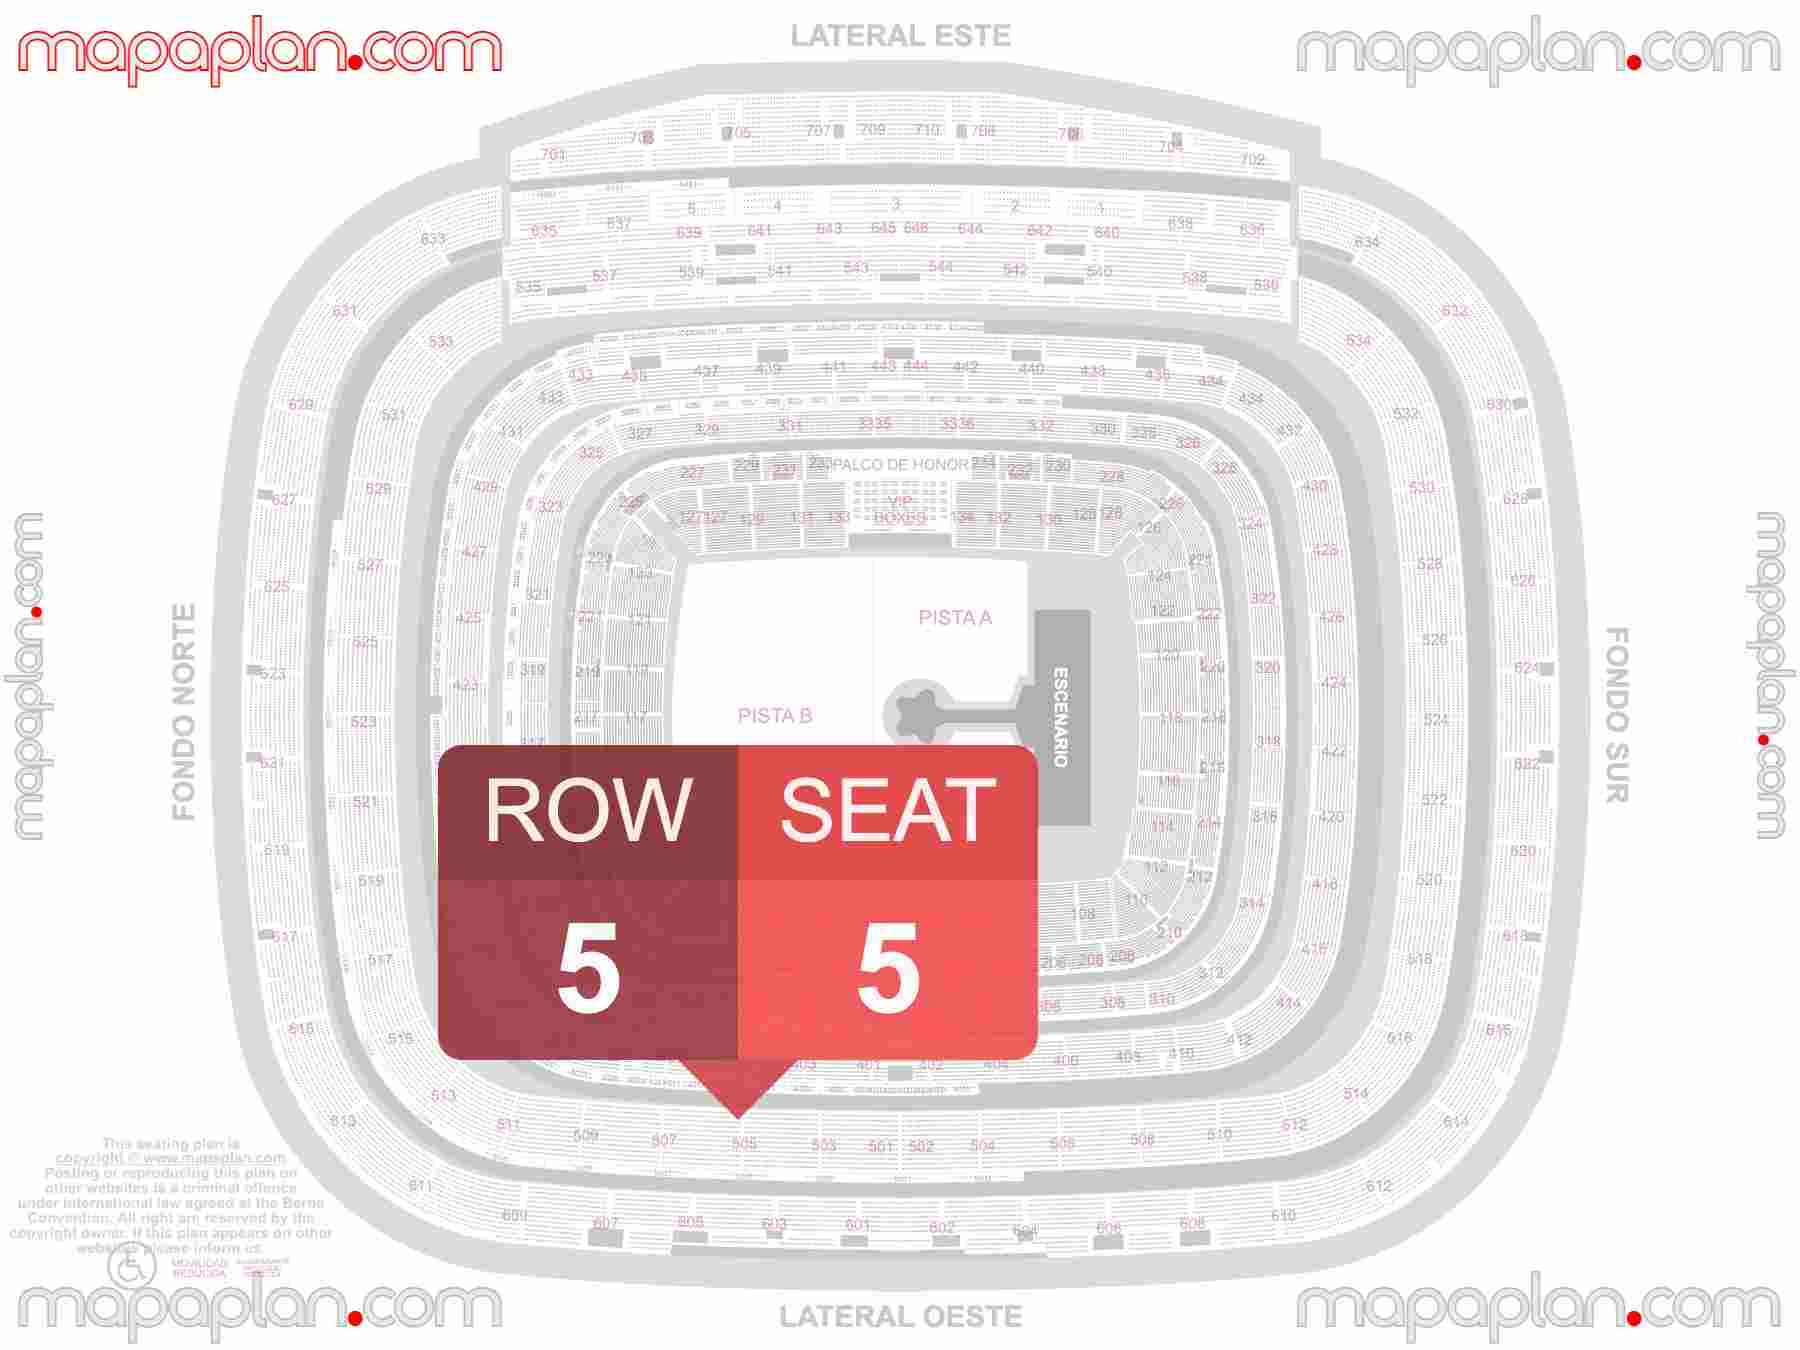 Madrid Santiago Bernabeu Estadio Stadium seating map Concerts (Conciertos mapa de asientos con numeros de asiento y fila) seating map with exact section numbers showing best rows and seats selection 3d layout - Best interactive seat finder tool with precise detailed location data